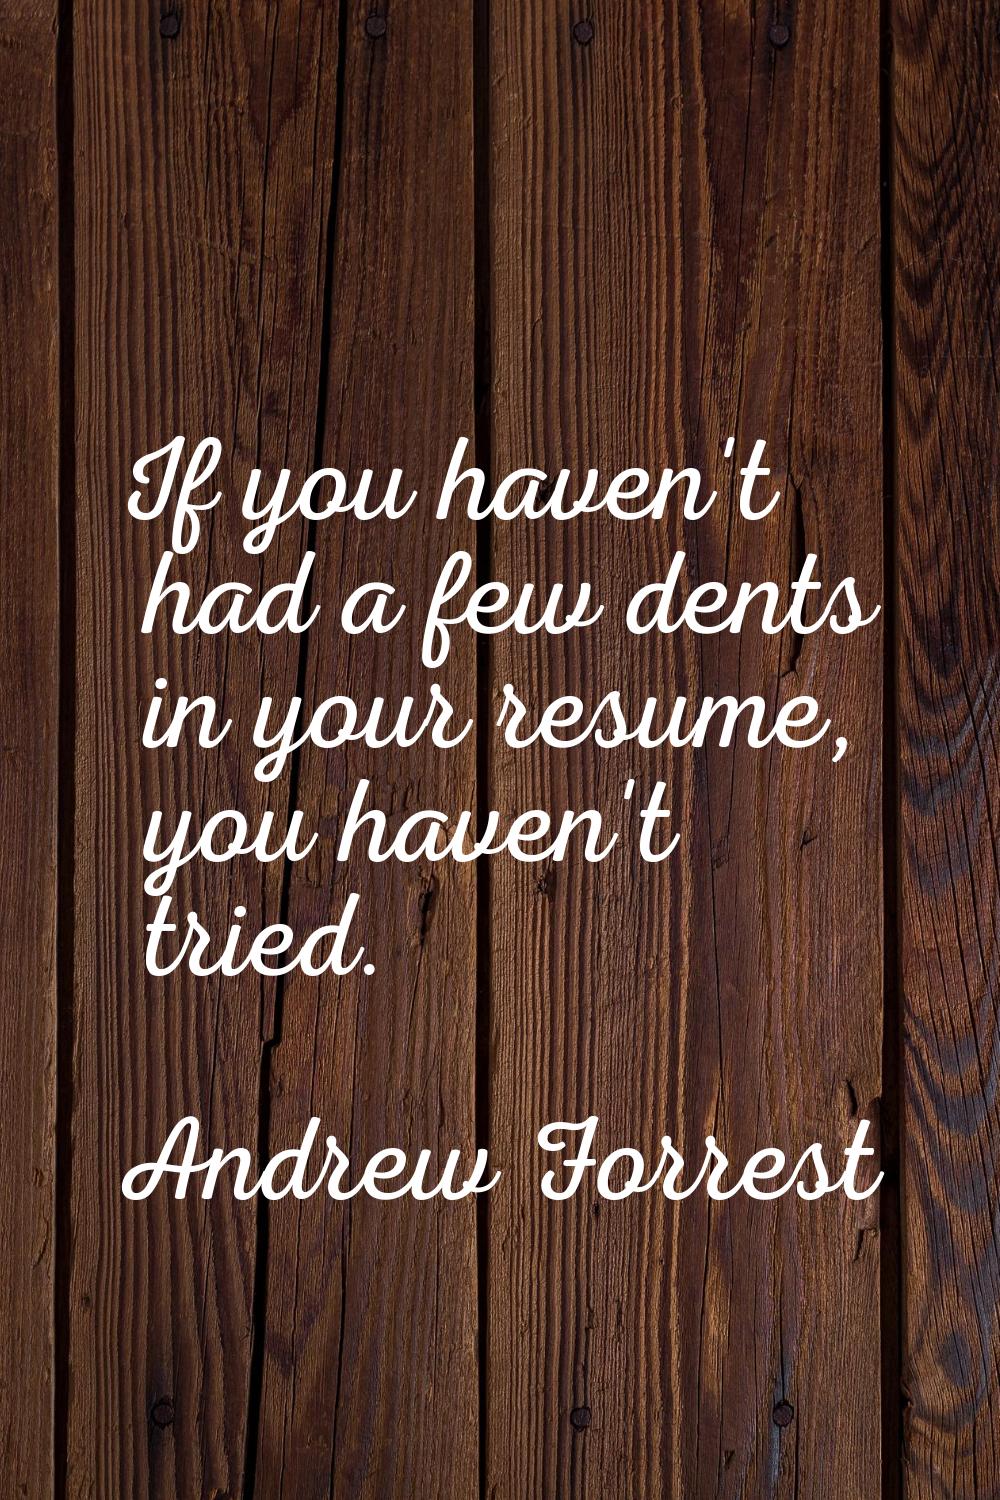 If you haven't had a few dents in your resume, you haven't tried.